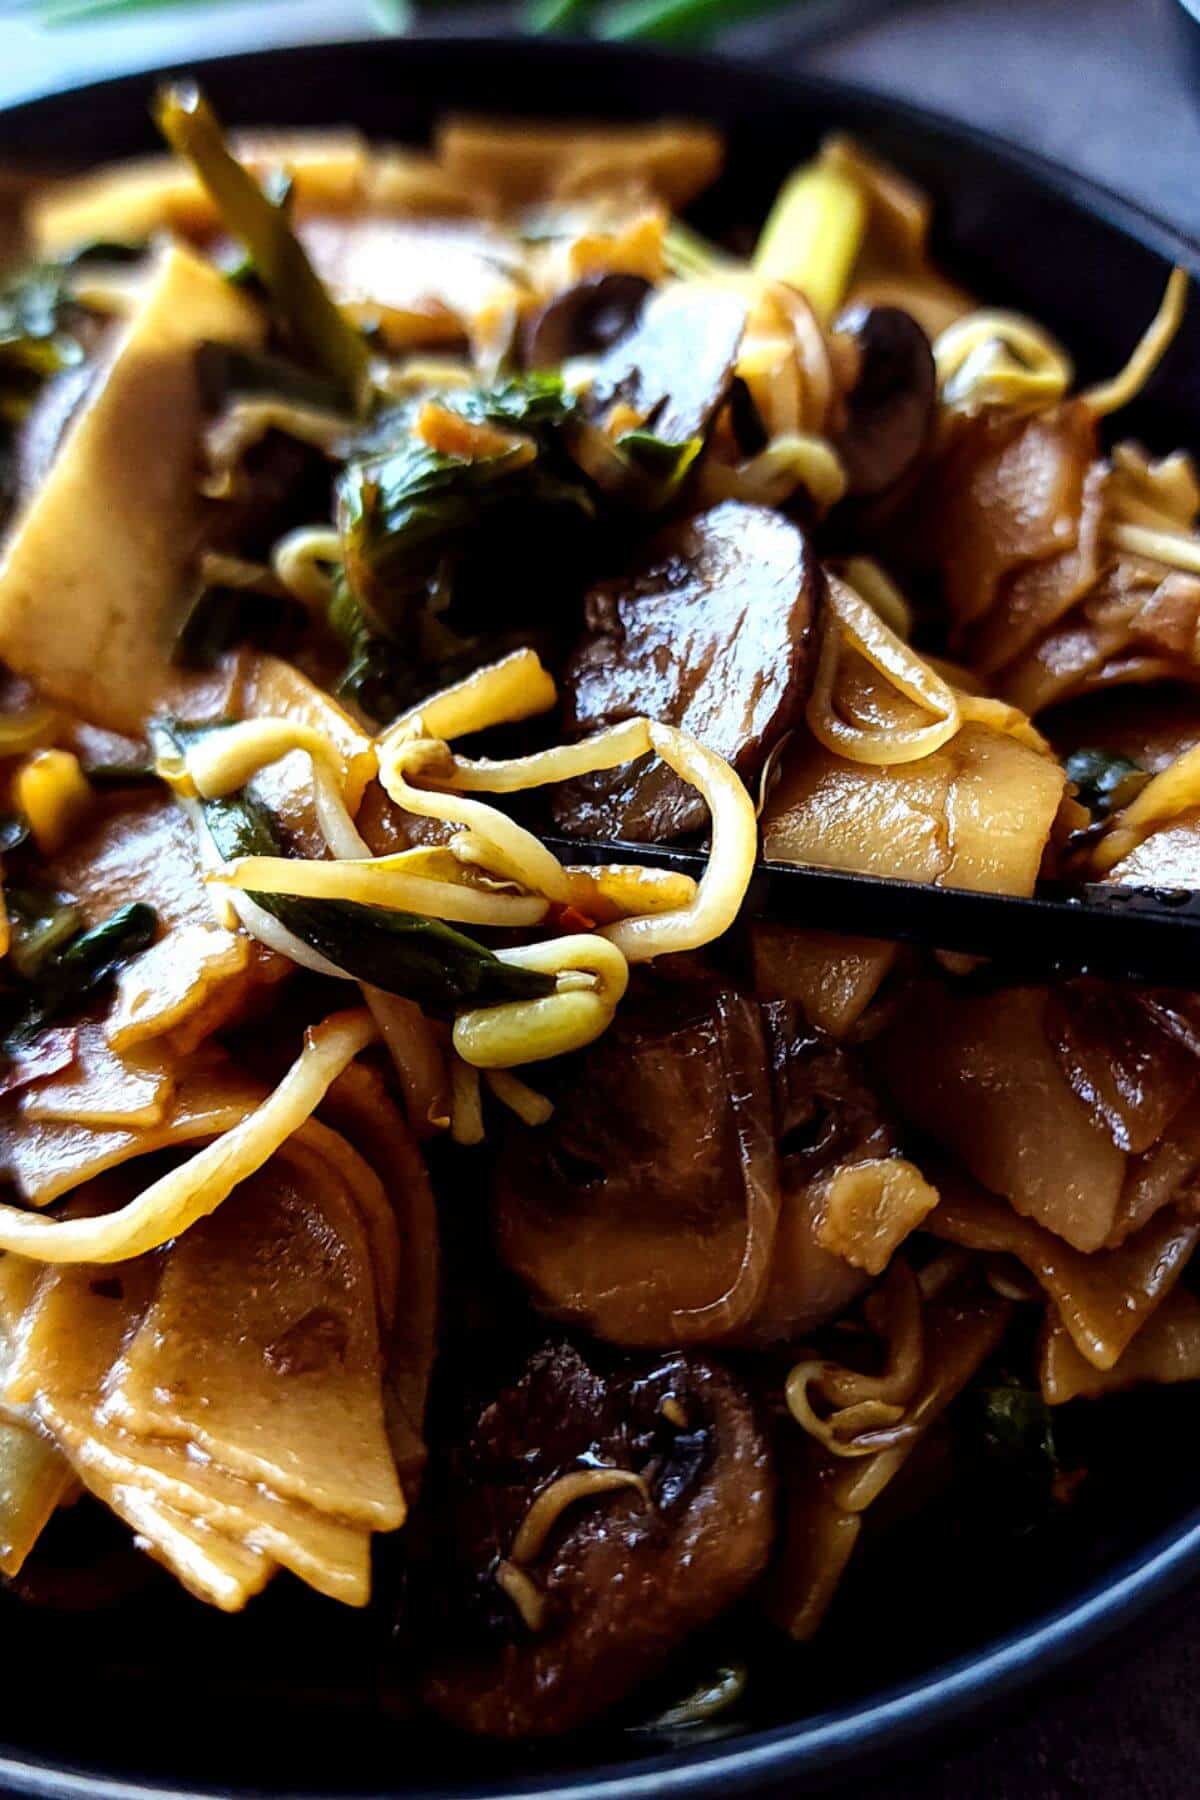 Chow fun noodles with mushrooms in a bowl.